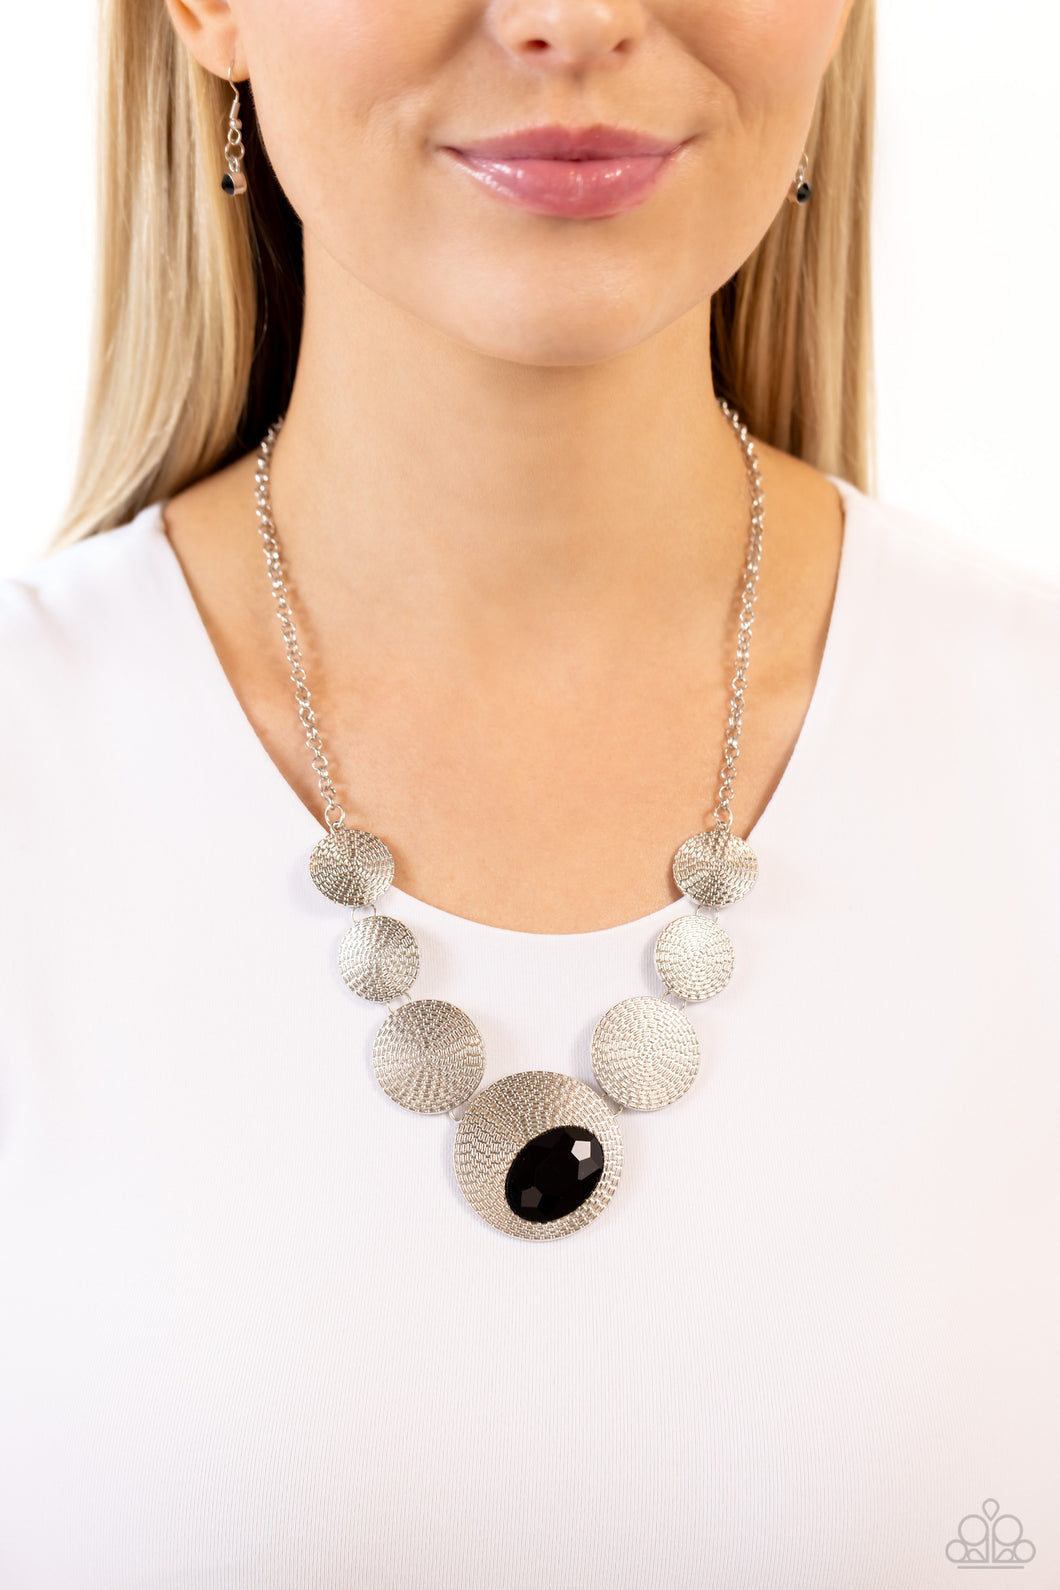 Embossed in an elongated dotted motif, a rustic collection of silver discs in varying sizes ruggedly links below the collar for an artisan inspired fashion. A faceted, oval, black gem sits at an angle on the biggest disc for a dauntless pop of color against the neckline. Features an adjustable clasp closure.  Sold as one individual necklace. Includes one pair of matching earrings.